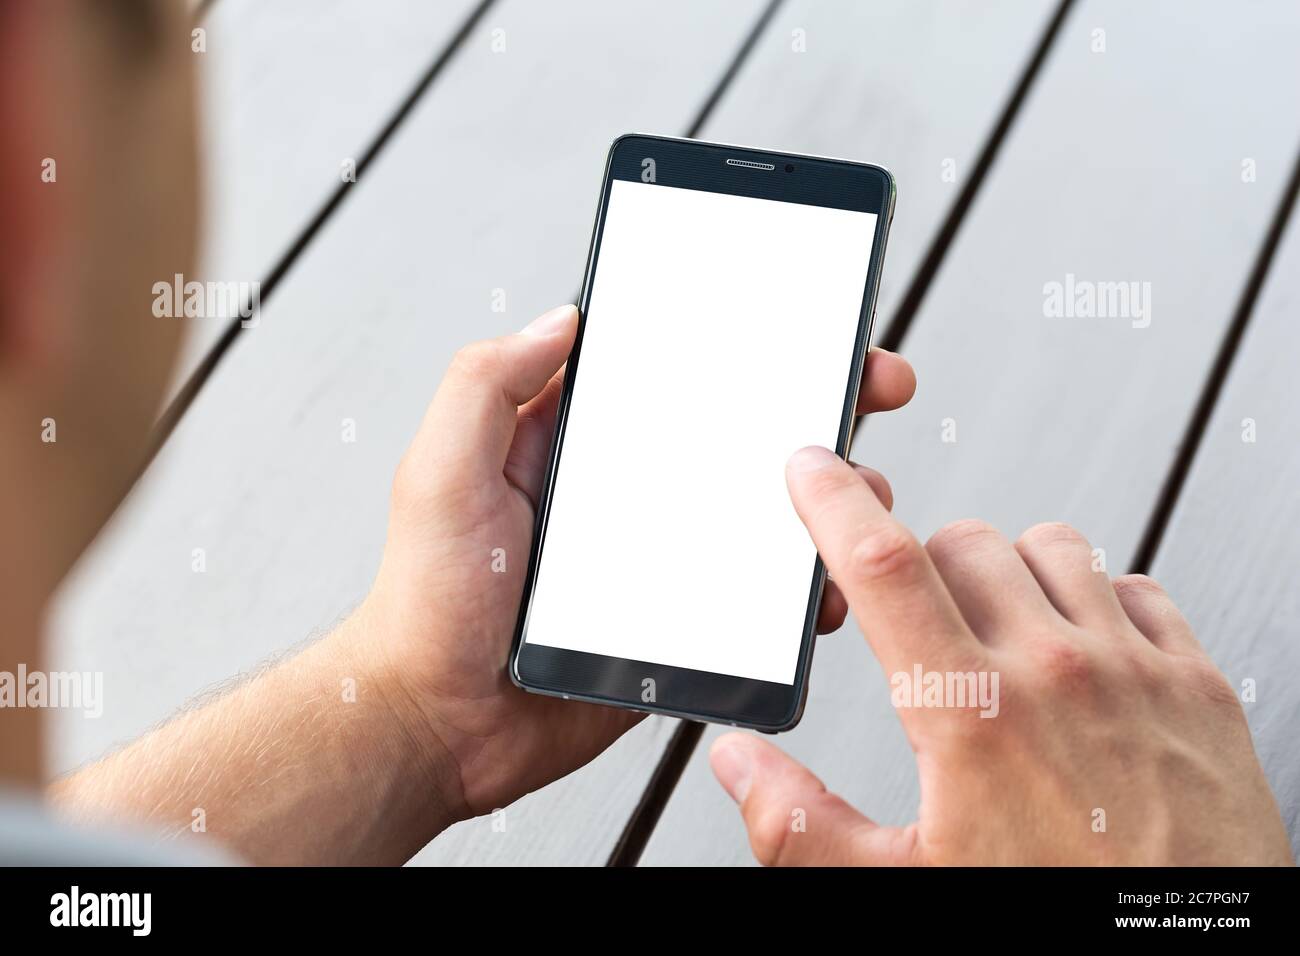 Man holding smart mobile phone on wooden table background Stock Photo